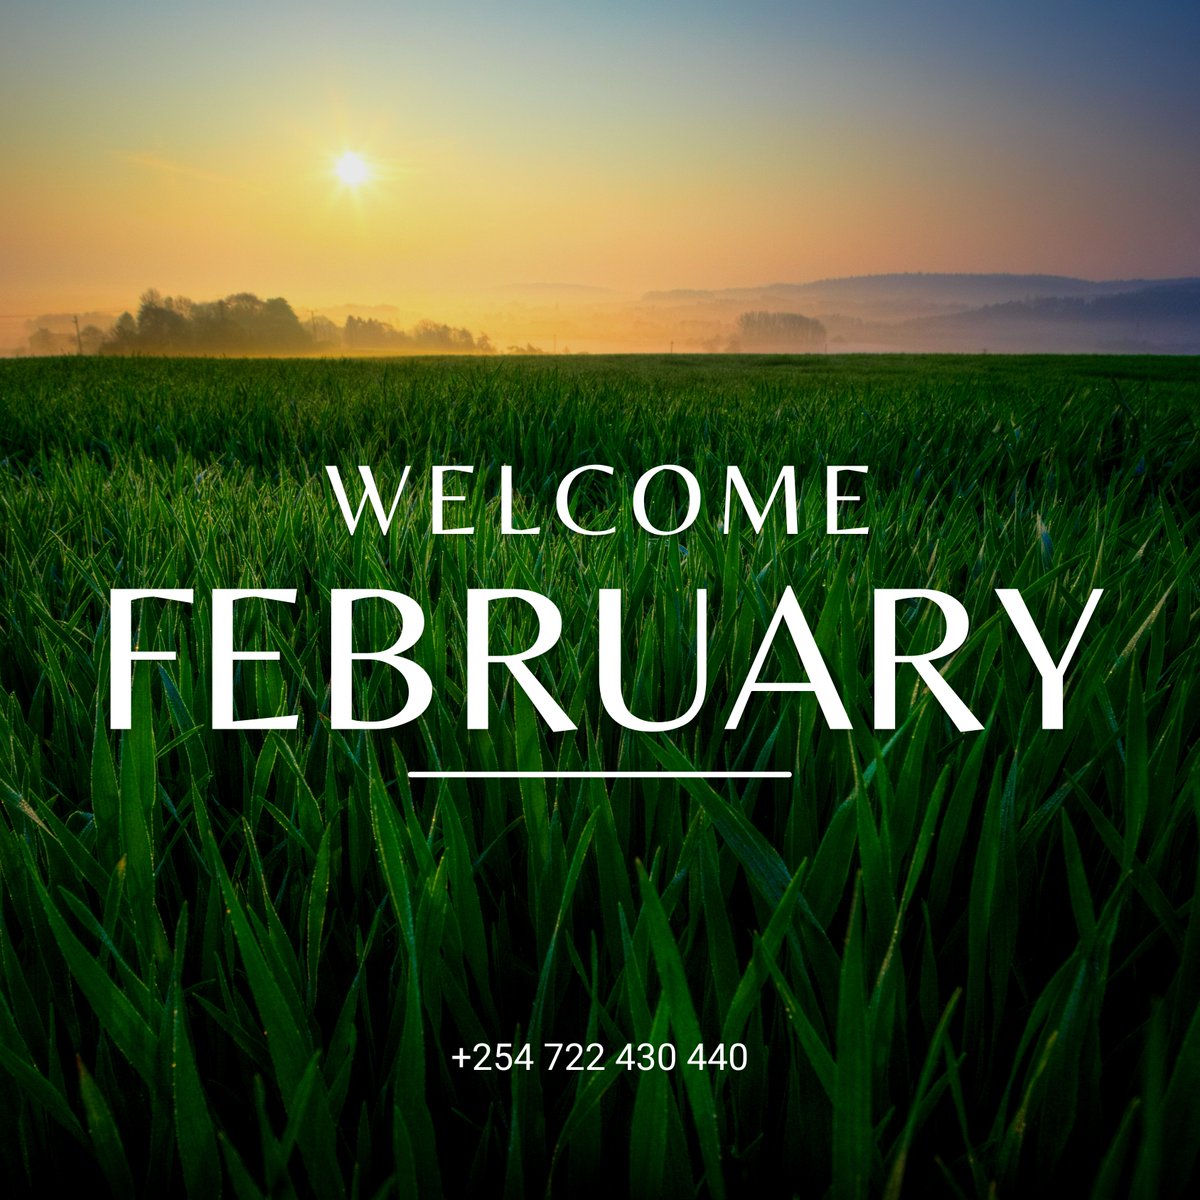 “Cheers to a new month and another chance for us to get it right.”
― Oprah Winfrey
📌 Fedha Estate Gate 2, Embakasi
☎ +254 722 430 440

#happynewmonth #kids #kindergarten #playgroup #fun #love #montgomeryschoolnairobi #cbc #pp2 #juniorsecondary #admission #trending #february